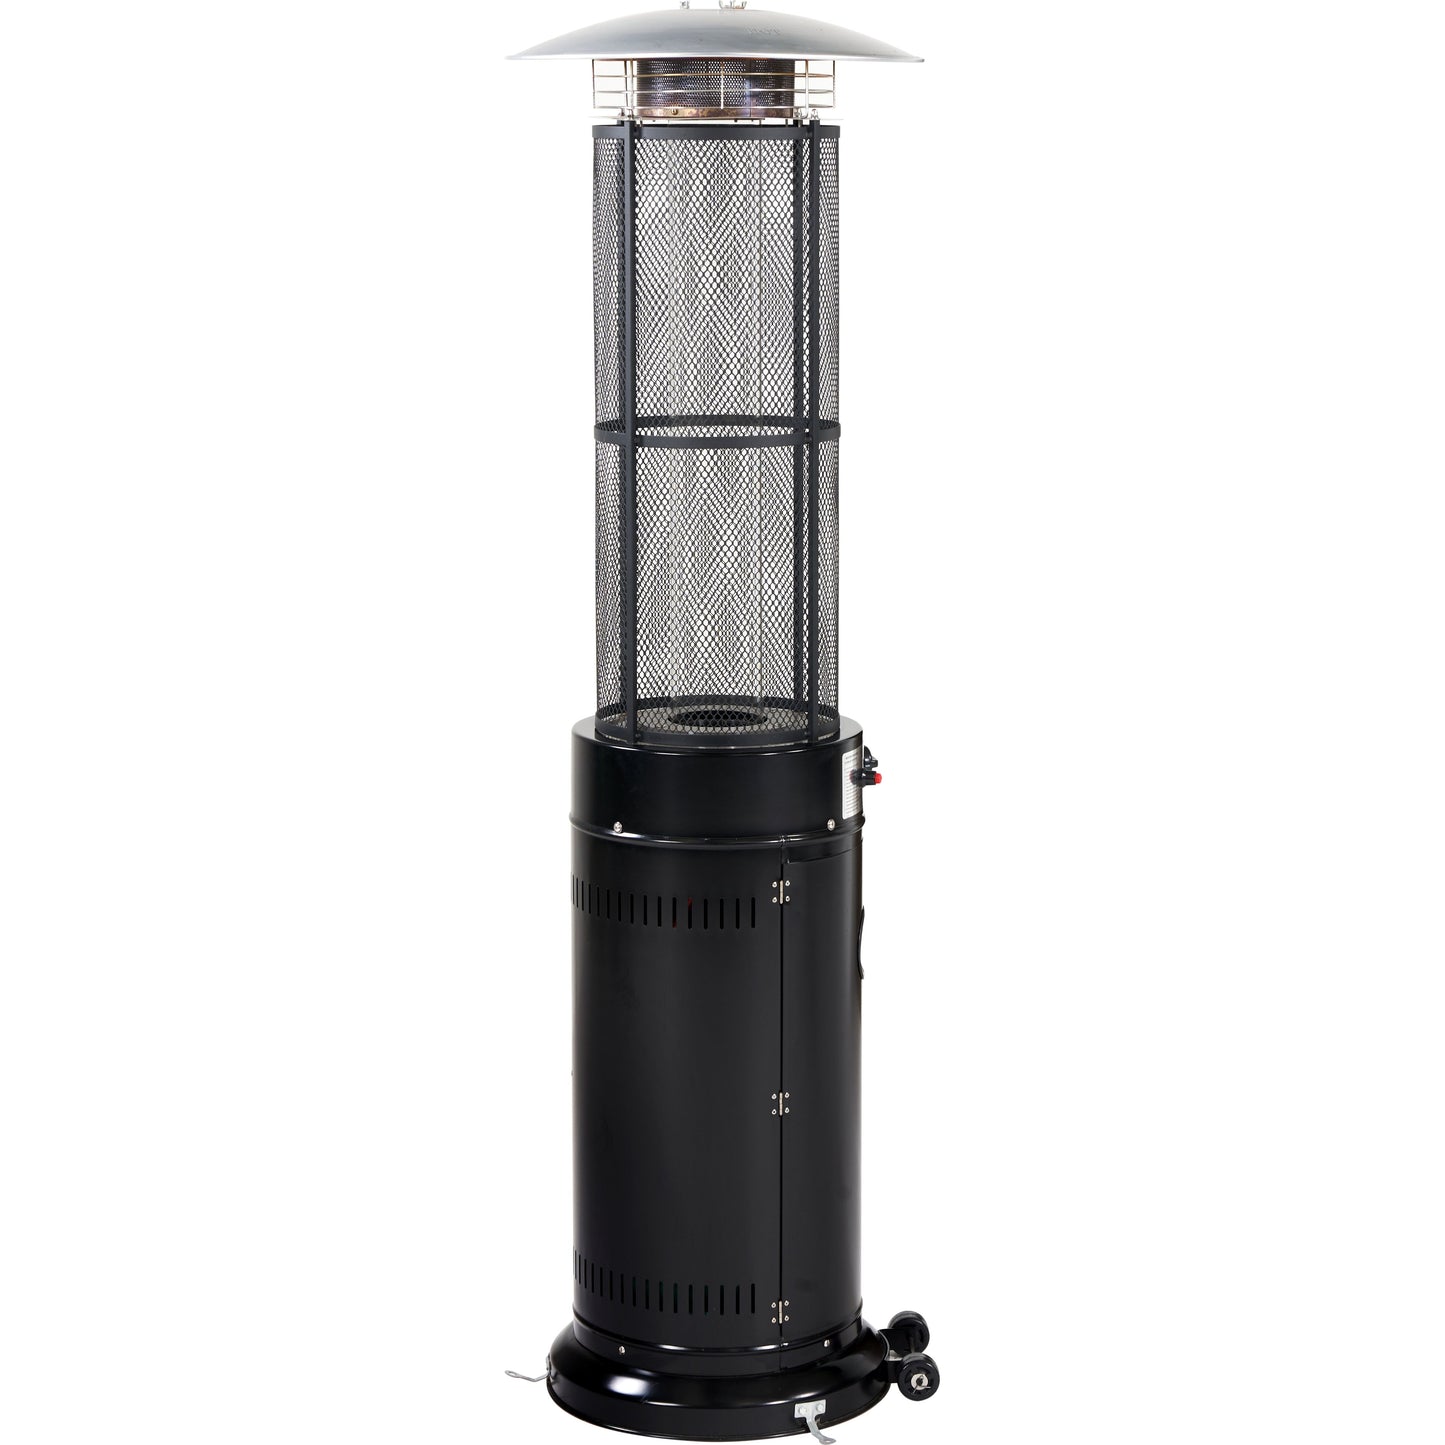 Cosi - Black Cylinder Patio Heater - Timeout Gardens